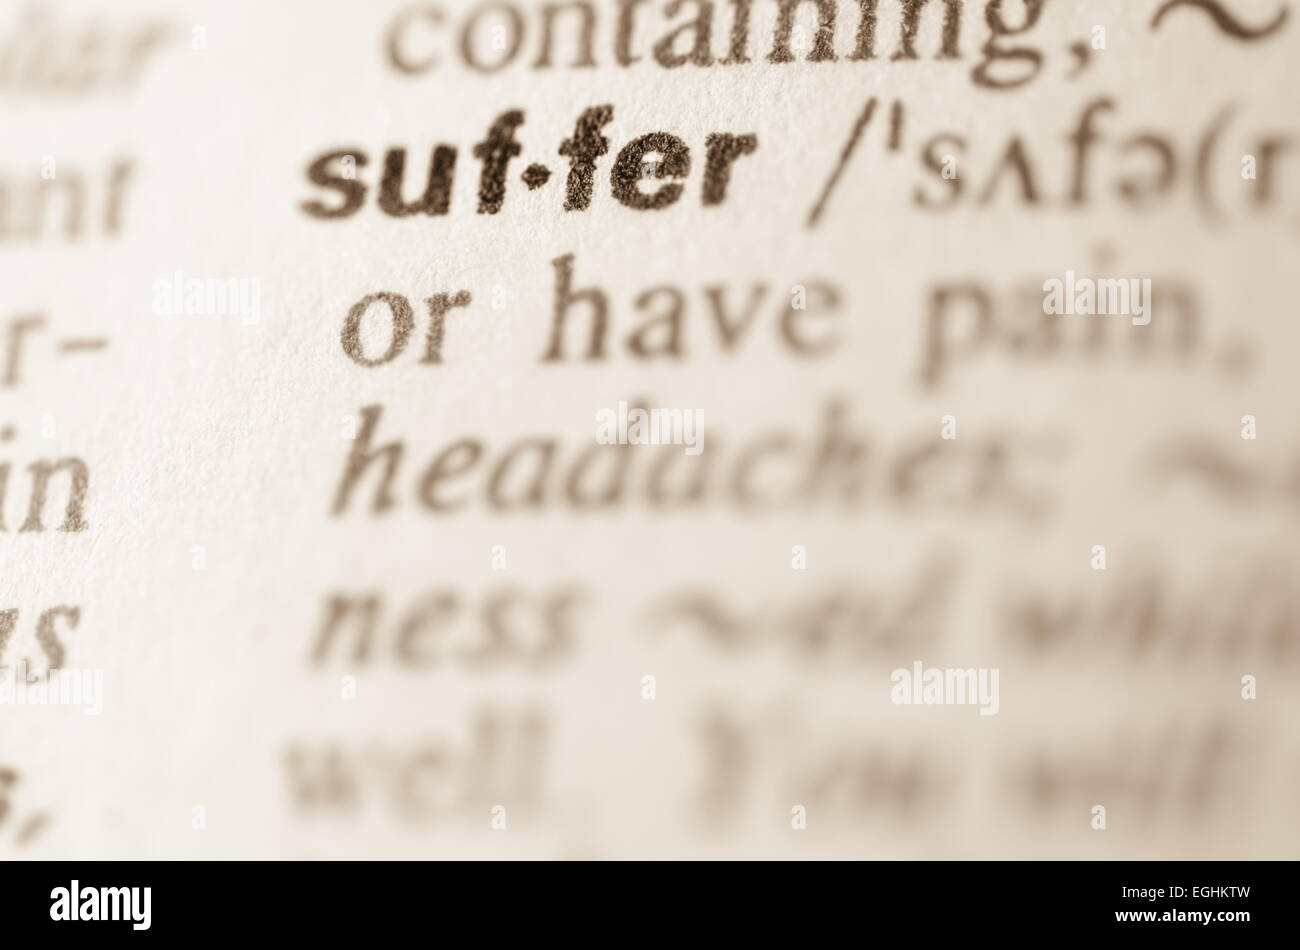 Definition of word suffer in dictionary Stock Photo